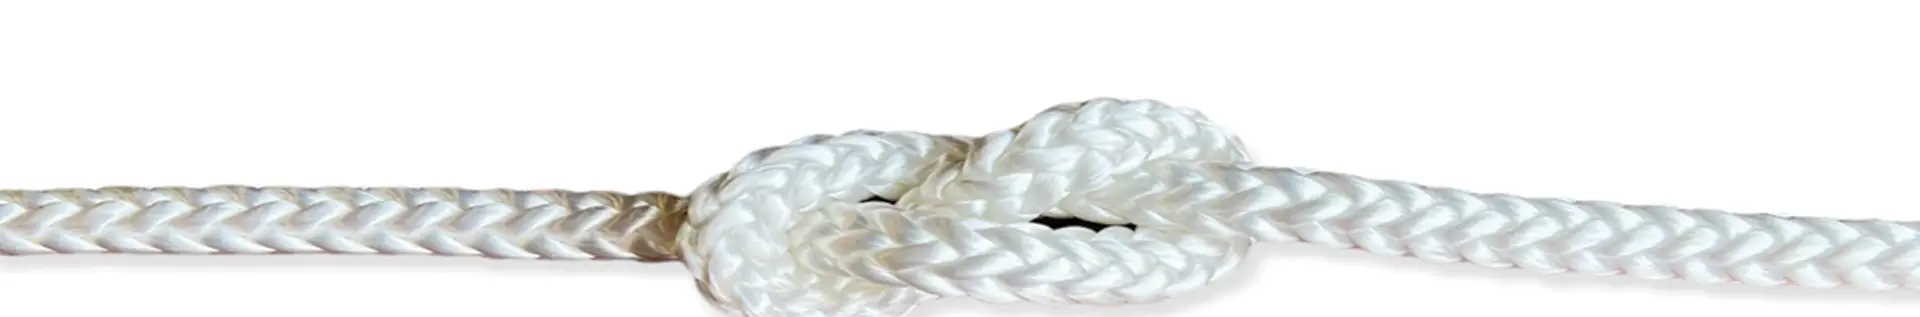 Polyester rope ht 8 mm - Cod. CO008PH